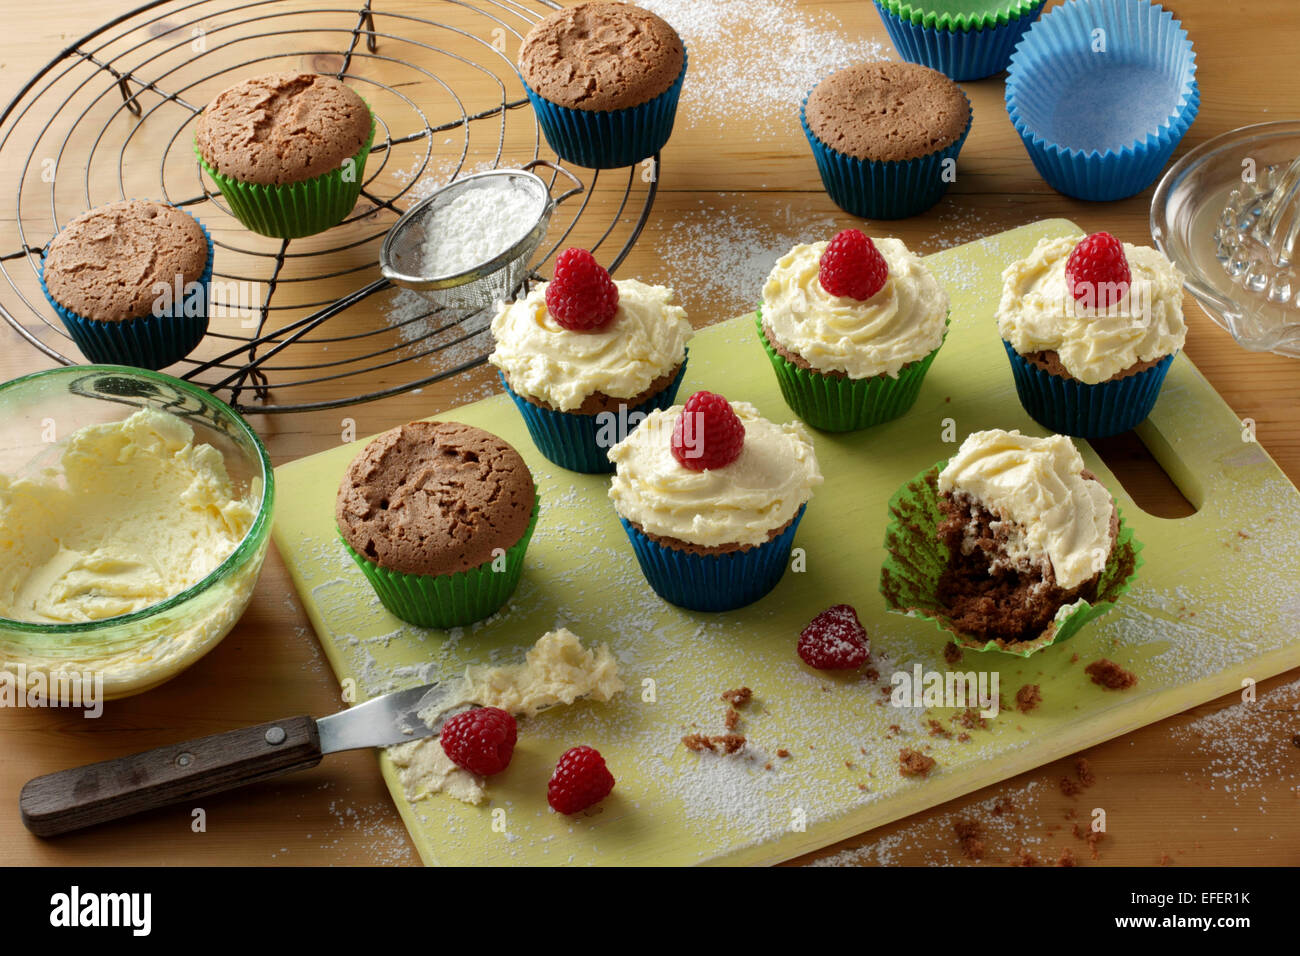 Cupcakes with buttercream frosting Stock Photo